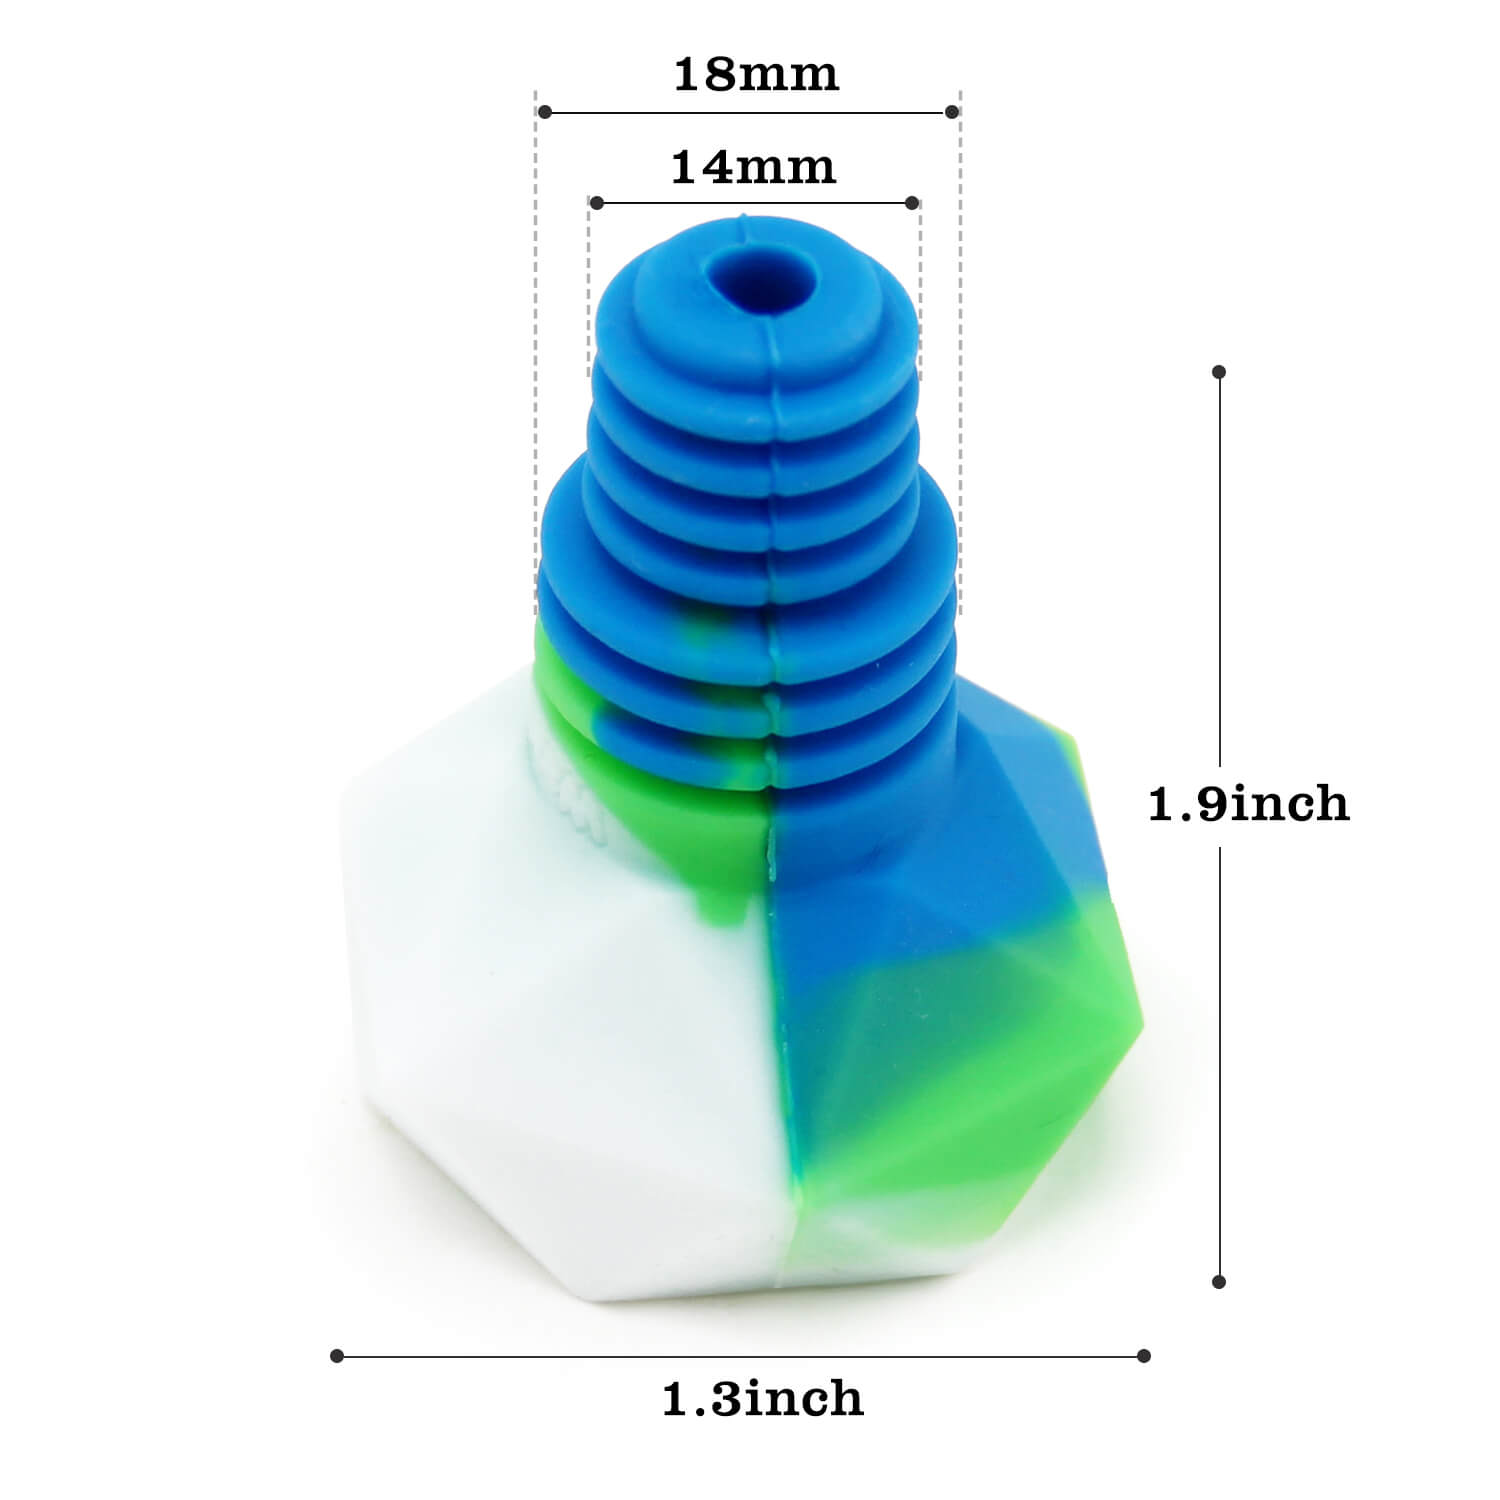 14mm/18mm dual use bong bowl size - INHALCO